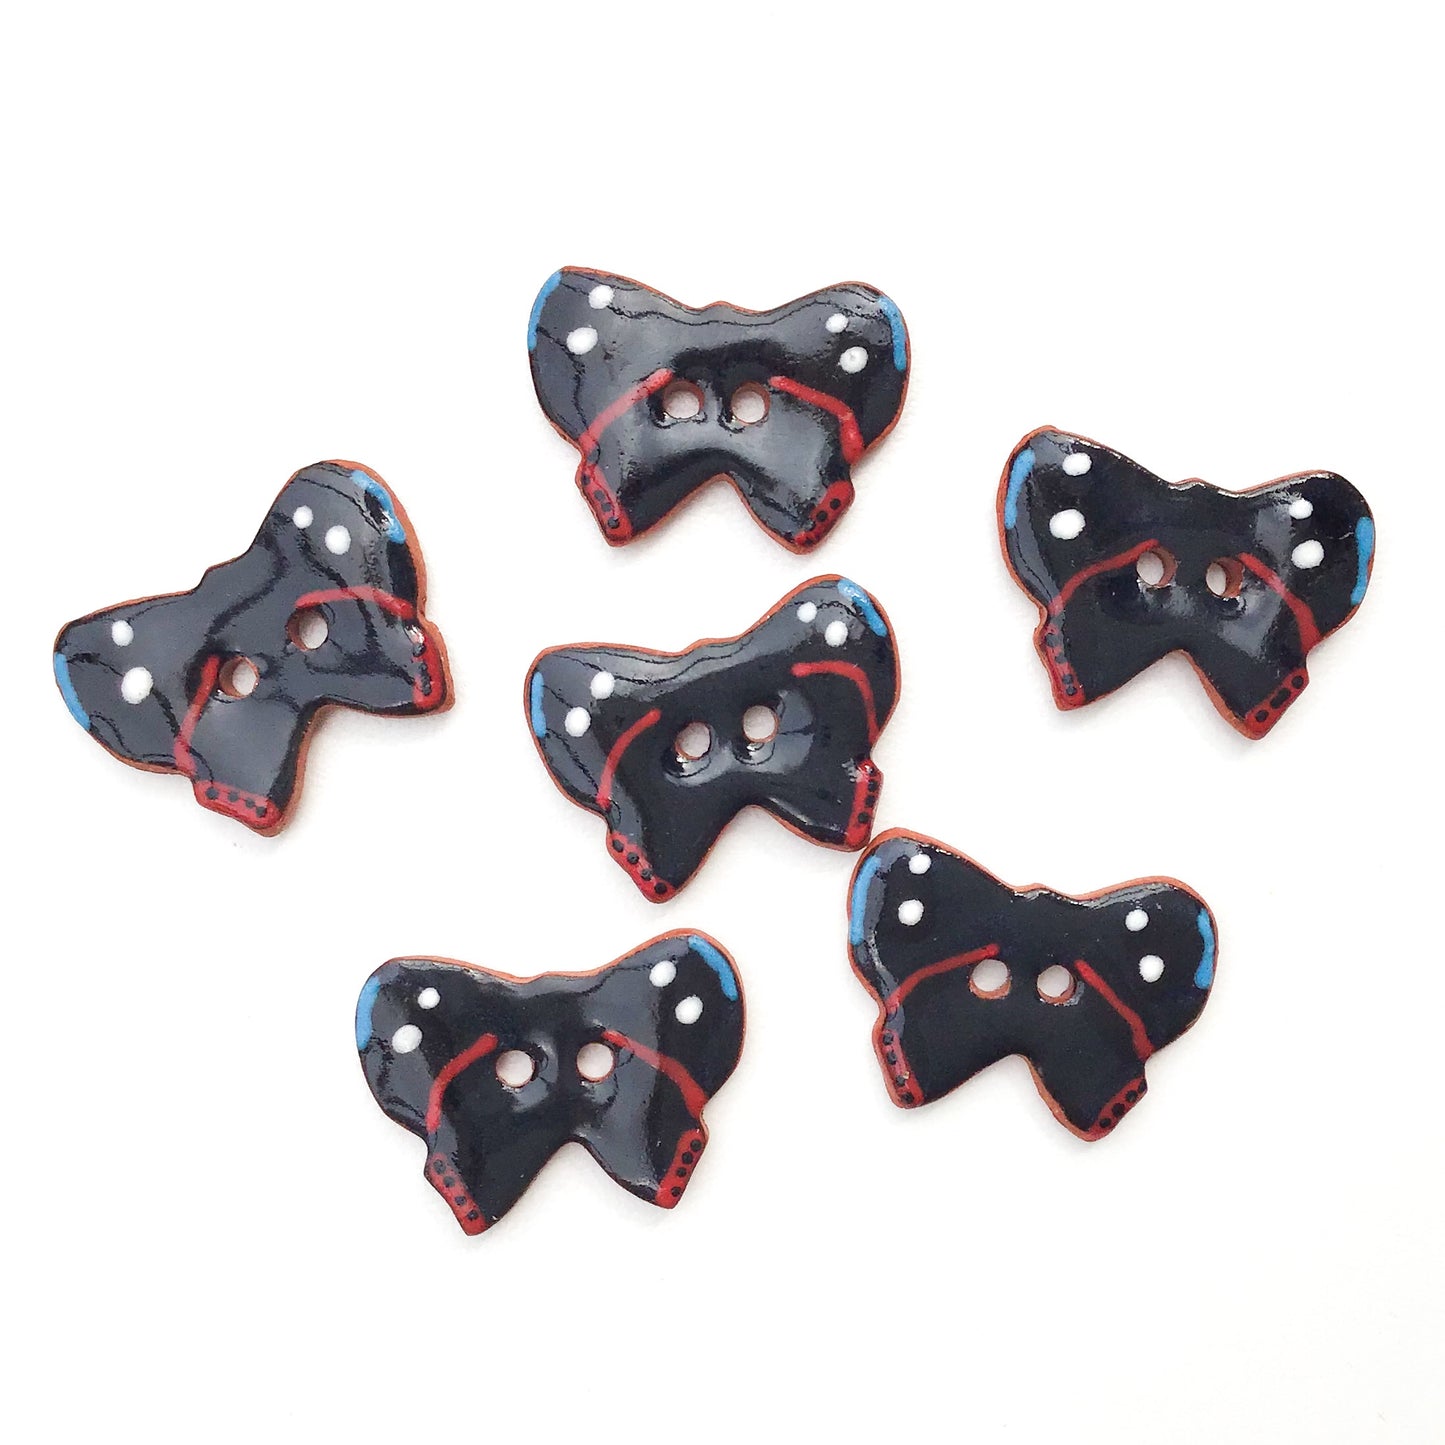 Ceramic Butterfly Buttons - Red and Black Butterfly Buttons - 5/8" x 7/8" - 6 Pack